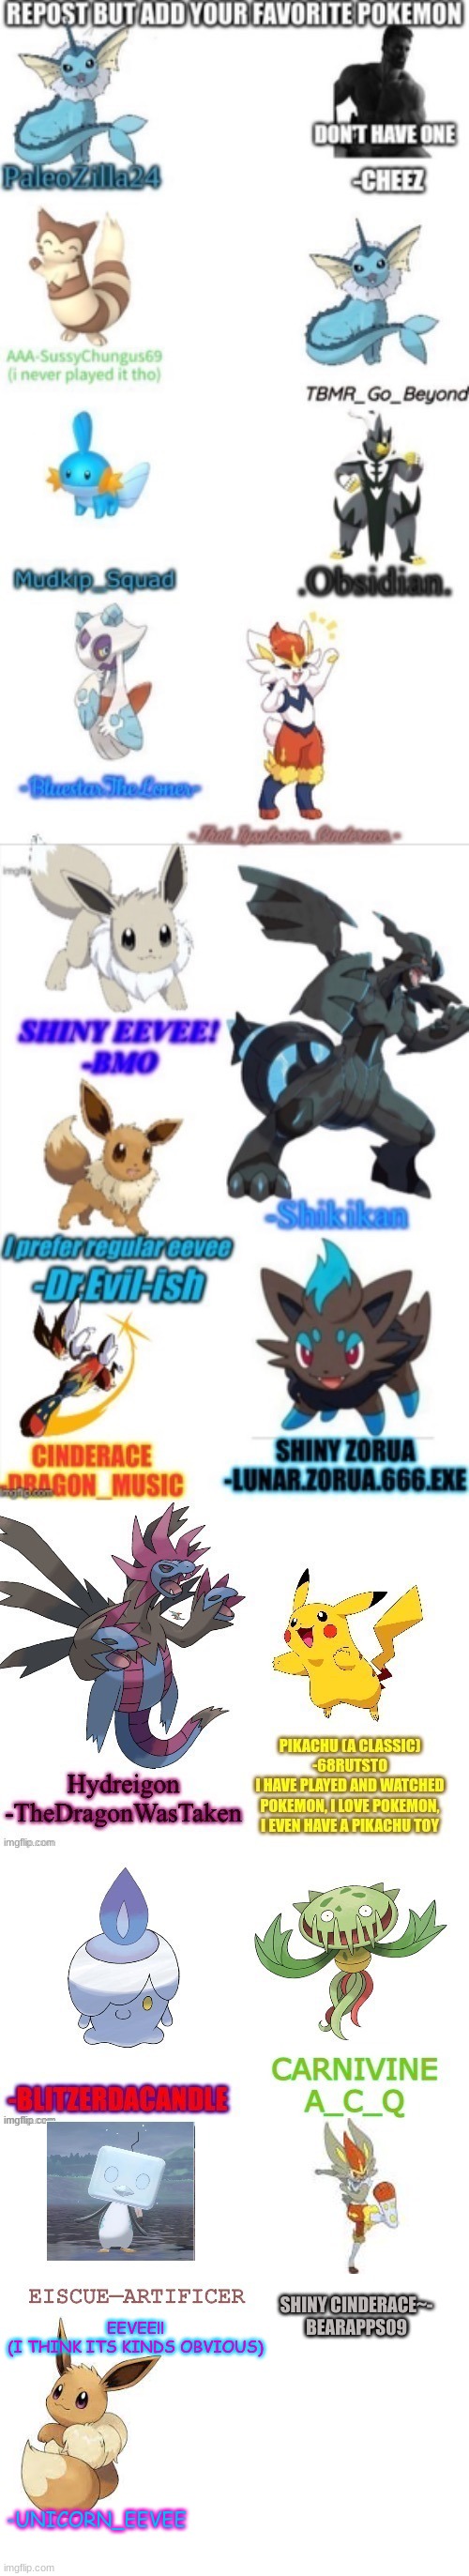 I added mine :3 | EEVEE!!
(I THINK ITS KINDS OBVIOUS); -UNICORN_EEVEE | image tagged in favorite pokemon | made w/ Imgflip meme maker